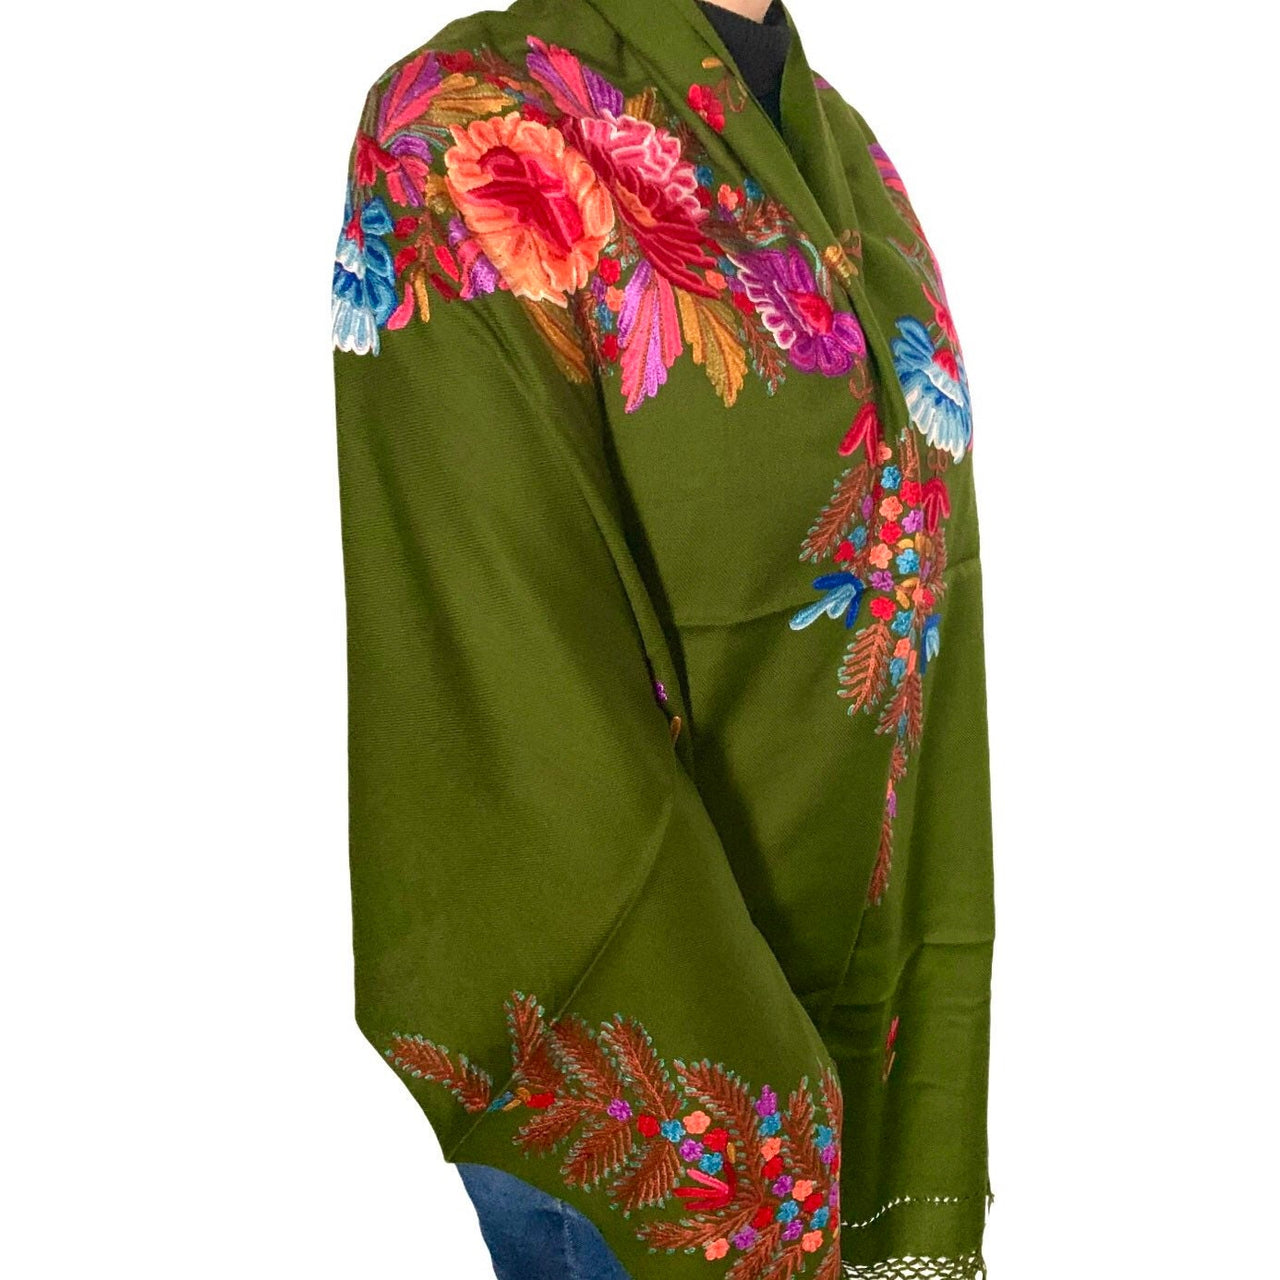 Gorgeous Green Multi-Coloured Silk Embroidered Scarf Shawl Wrap Stole